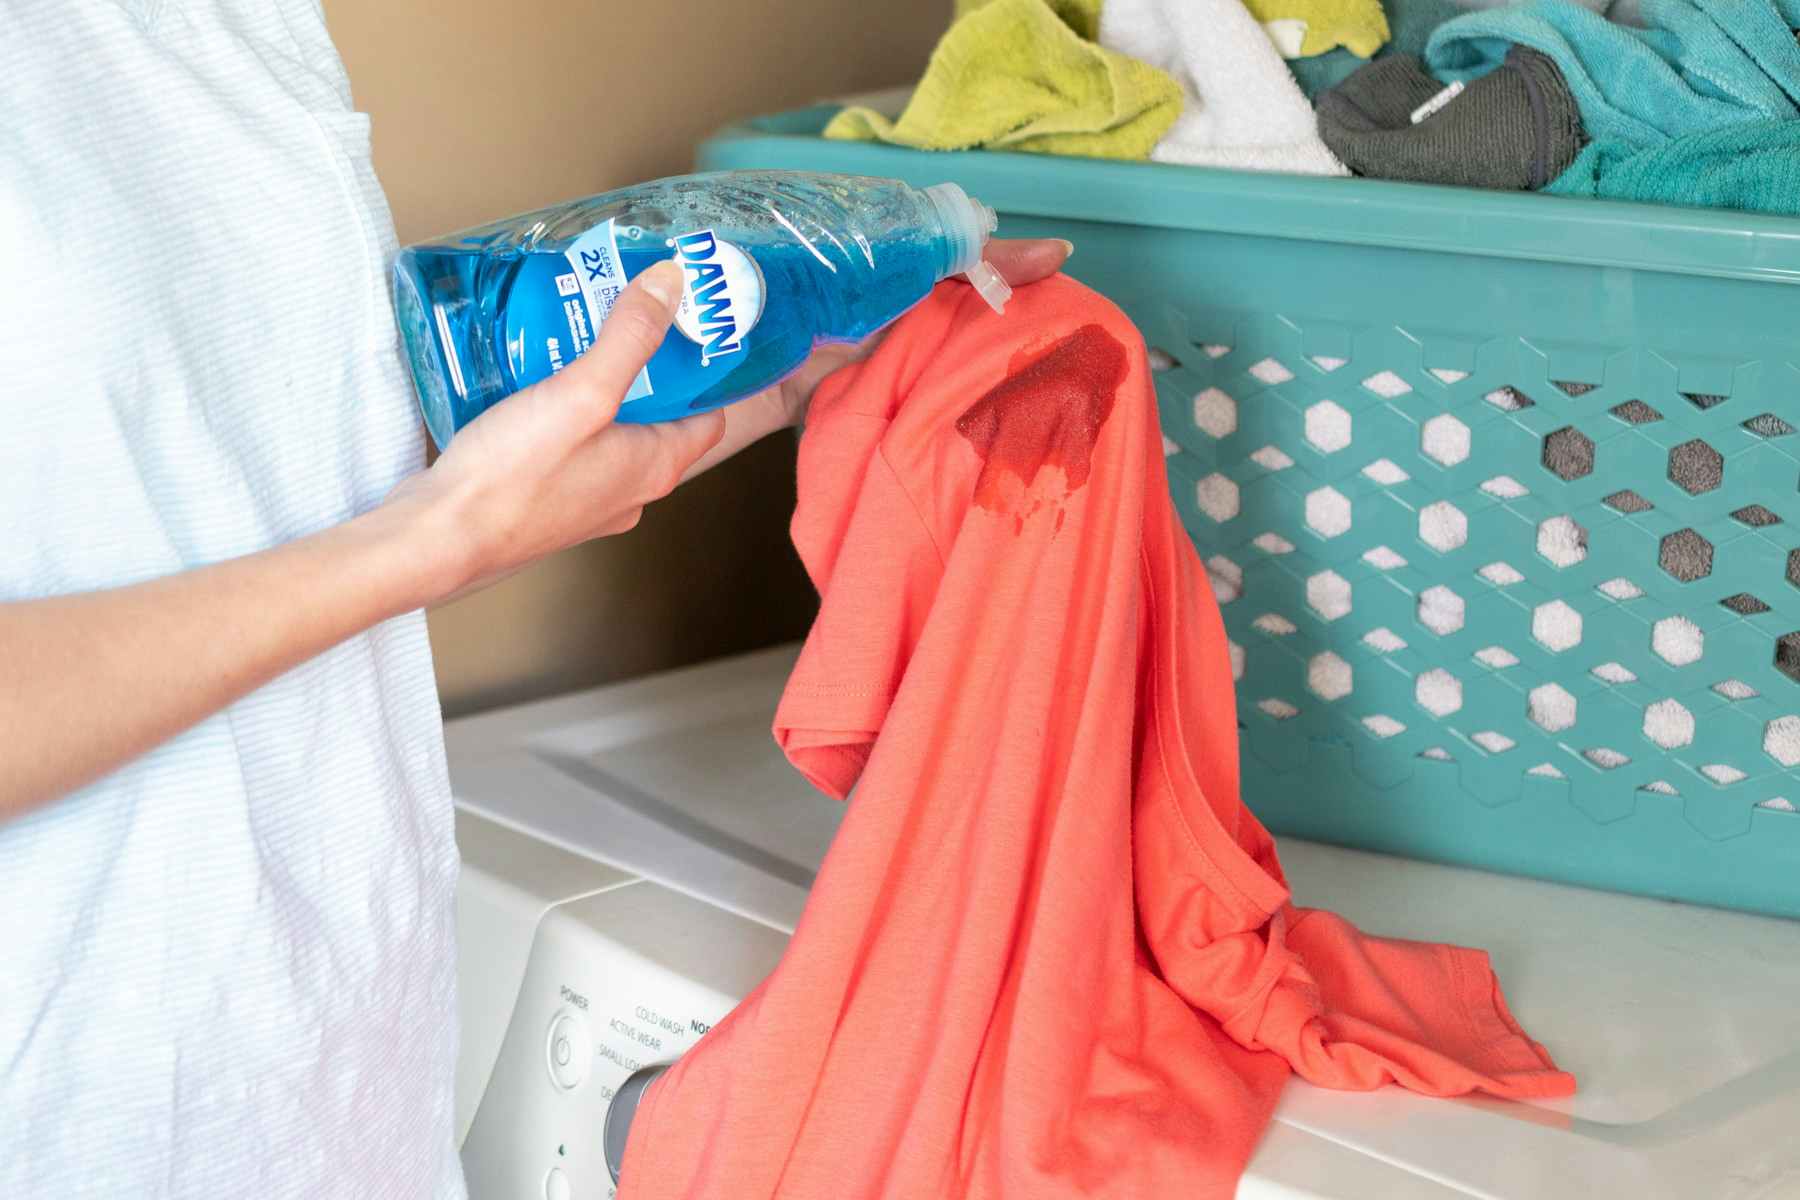 Pre-treat grease stains on clothing with Dawn dish soap.